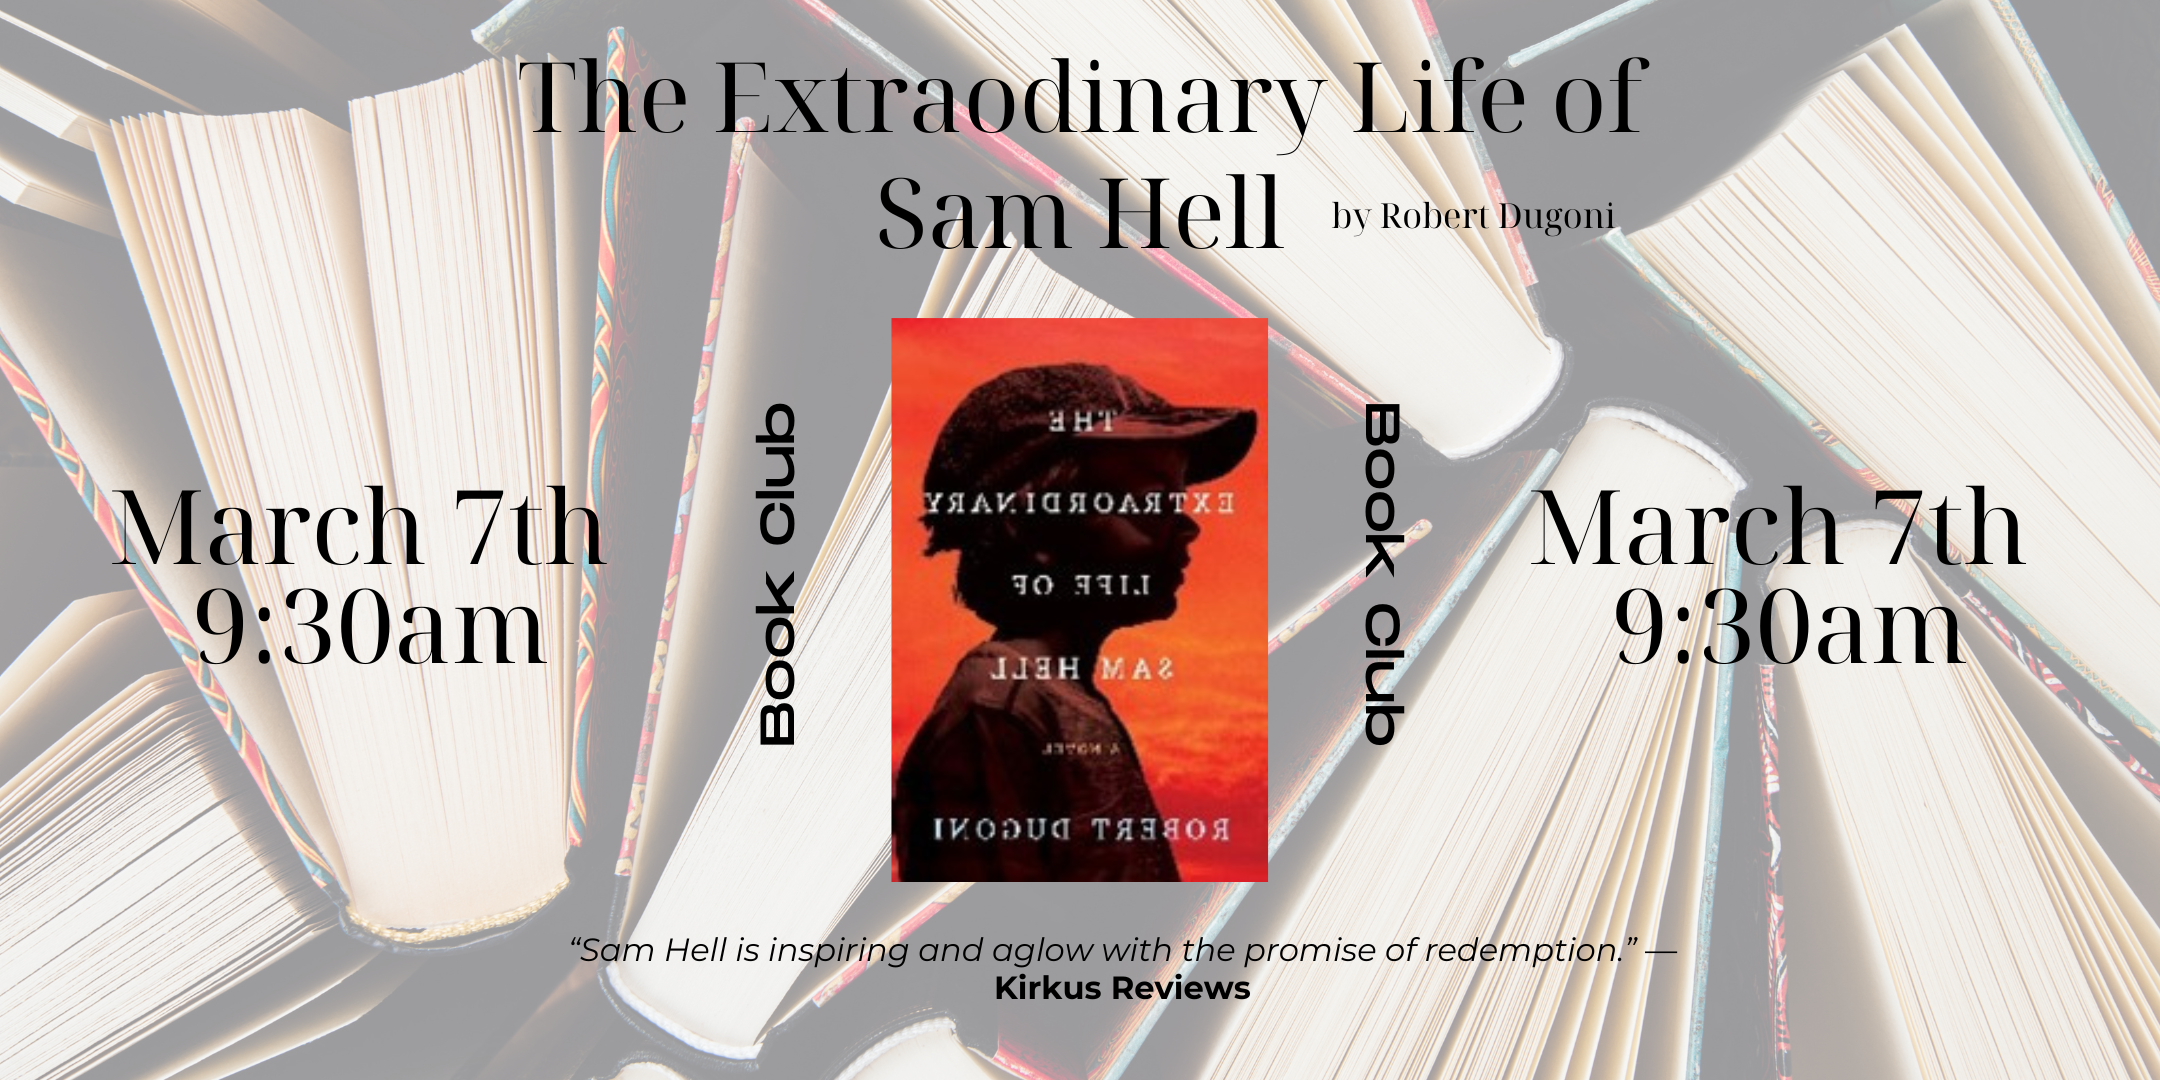 Book Club Book: The Extraordinary Life of Sam Hell by Robert Dugoni. March 7th at 9:30am